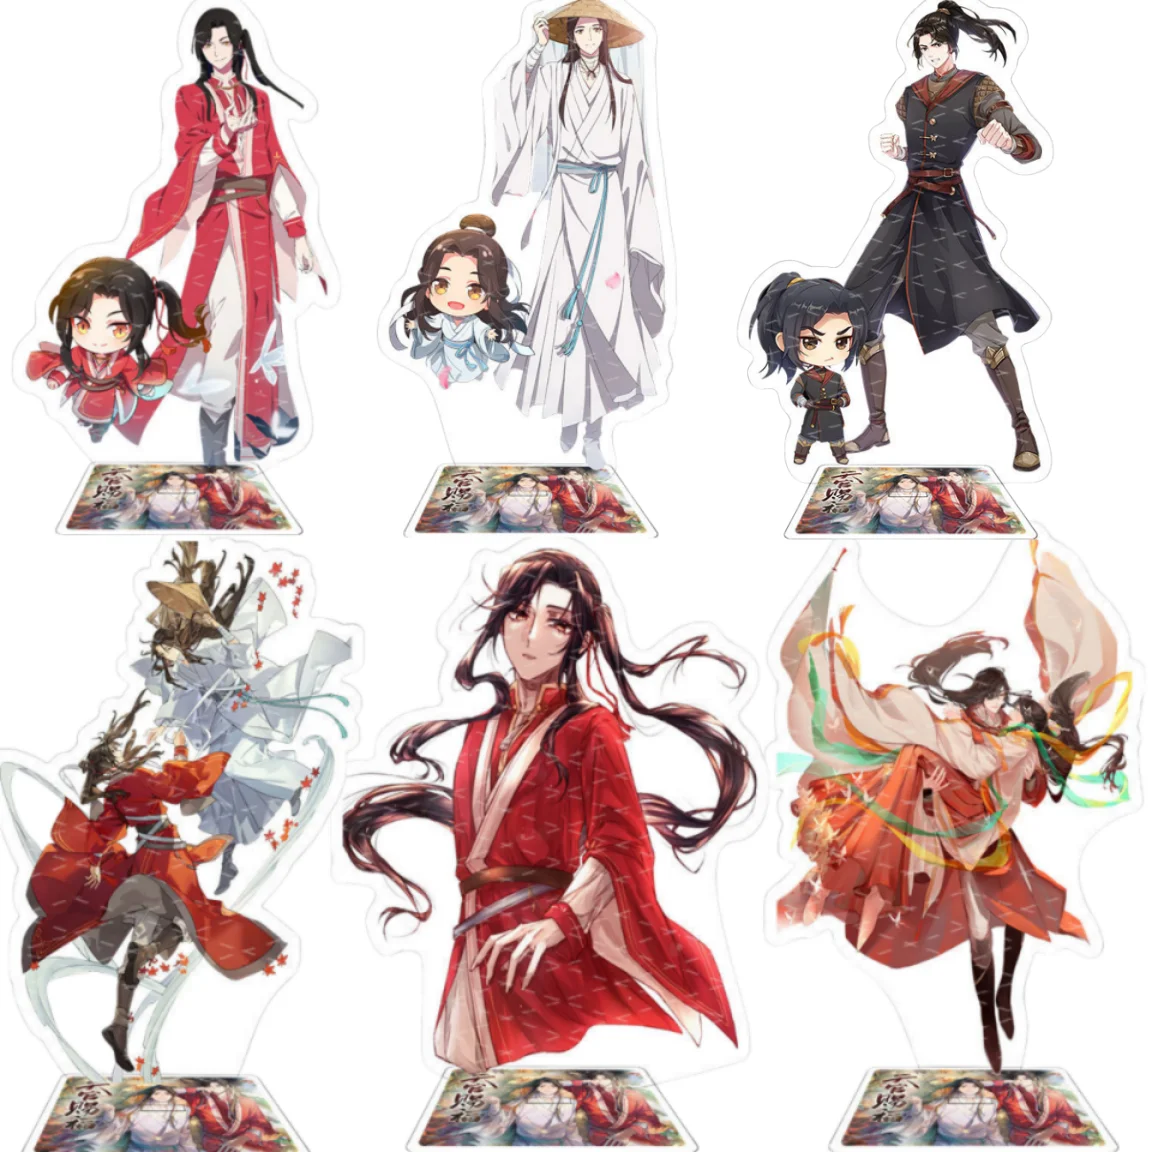 Hot Anime Heavenly God Blesses The People Tian Guan Ci Fu Xie Lian Hua Cheng Acrylic Stand Model Cartoon Figures Fans Gifts 15cm heavenly minded mom